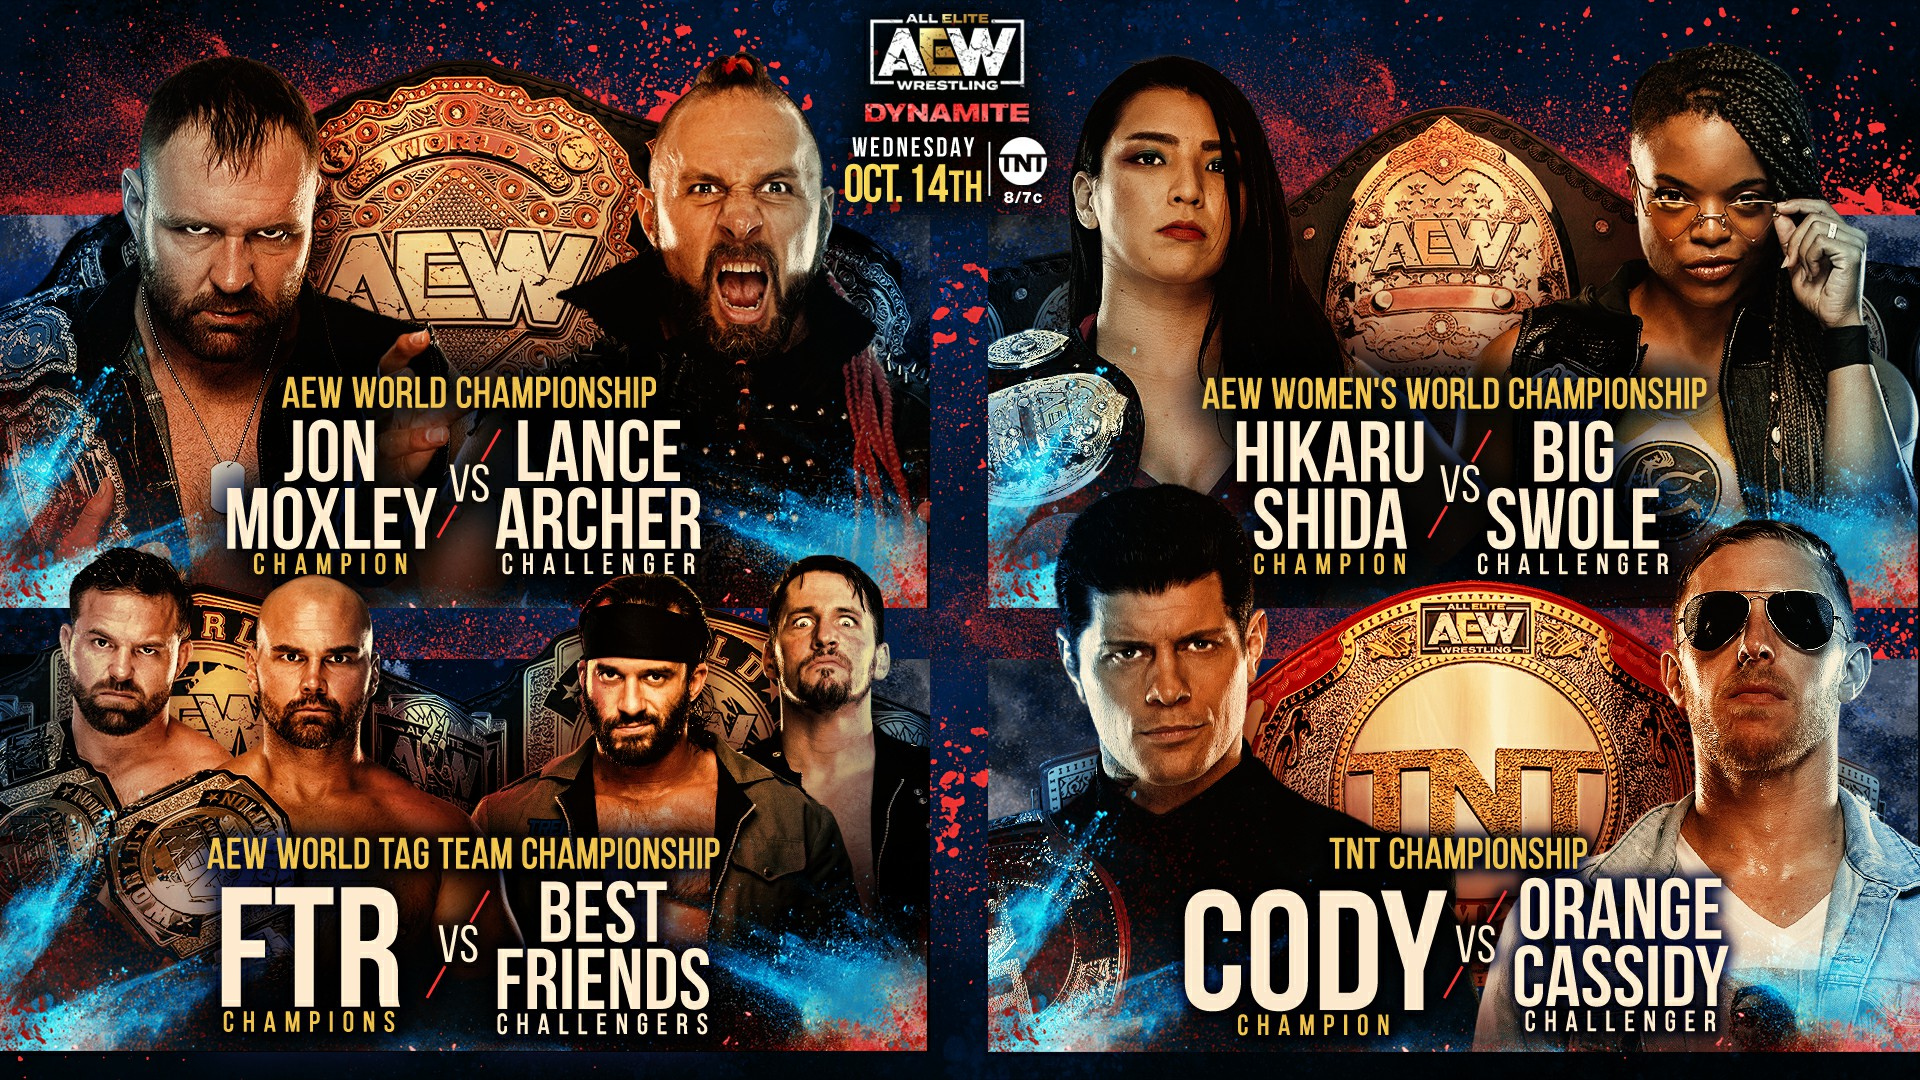 aew-dynamite-results-oct-14-2020-anniversary-show-4-title